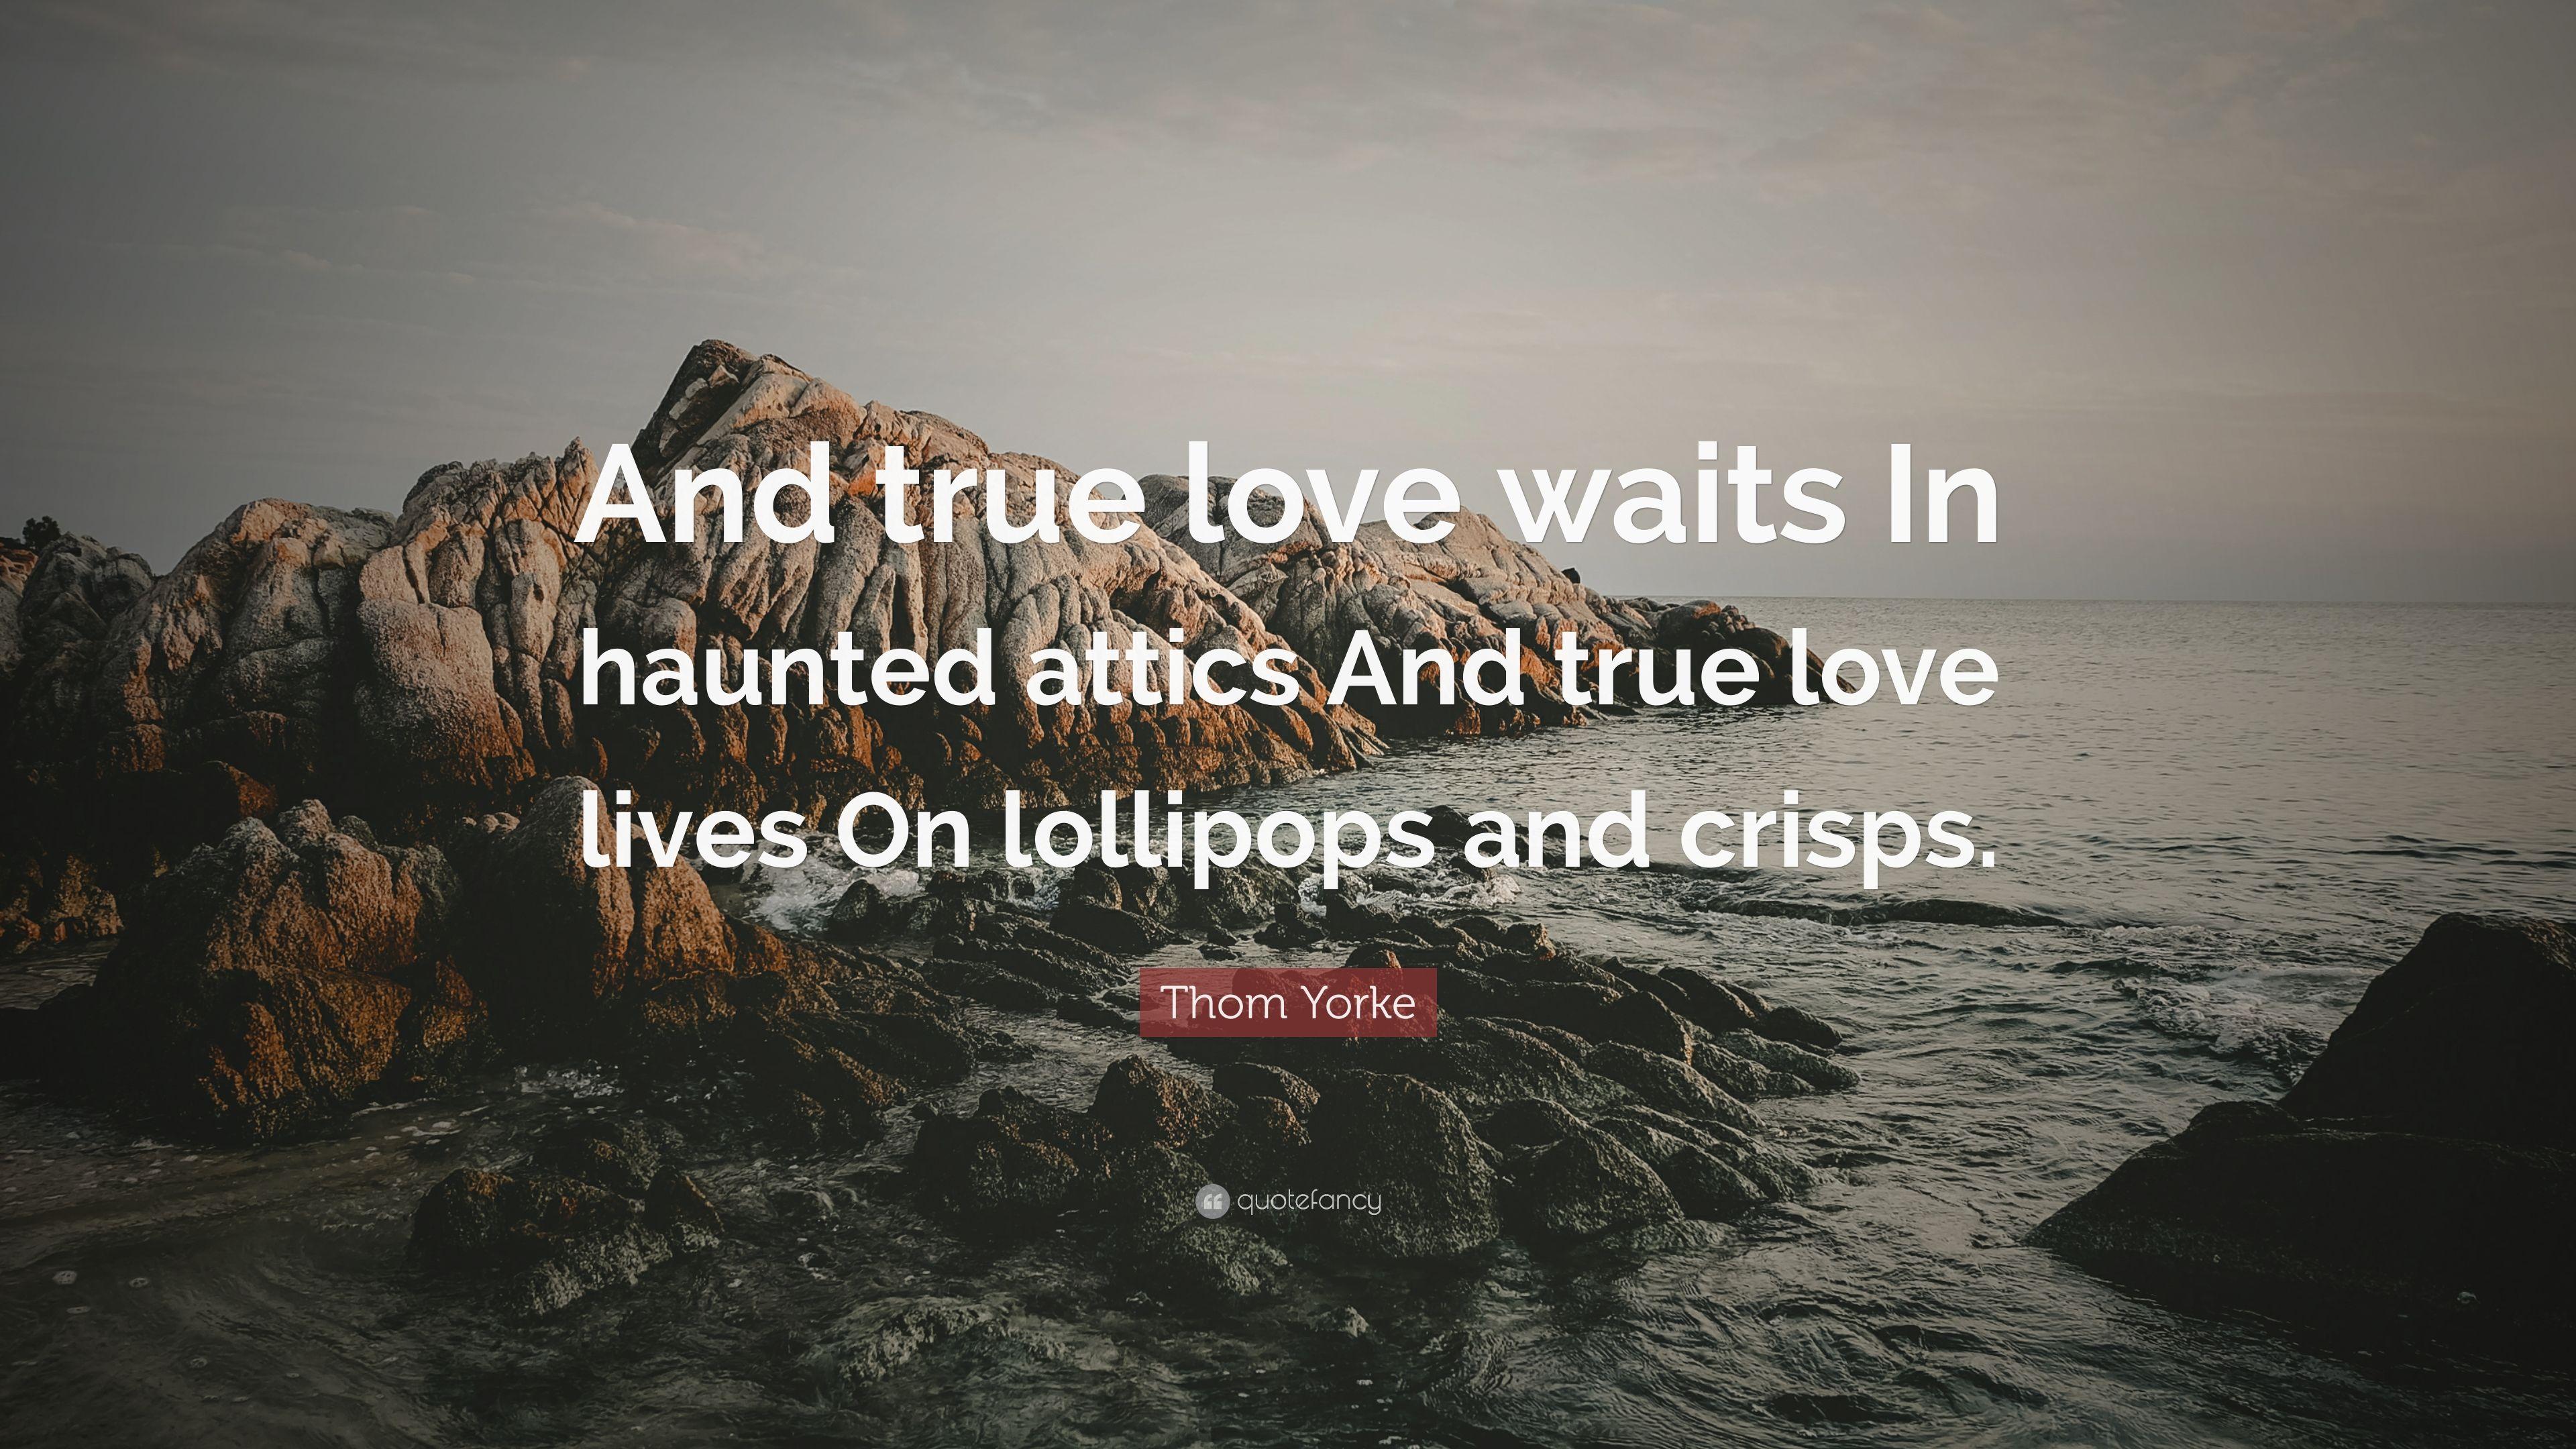 True Love Waits Wallpapers Top Free True Love Waits Backgrounds Wallpaperaccess